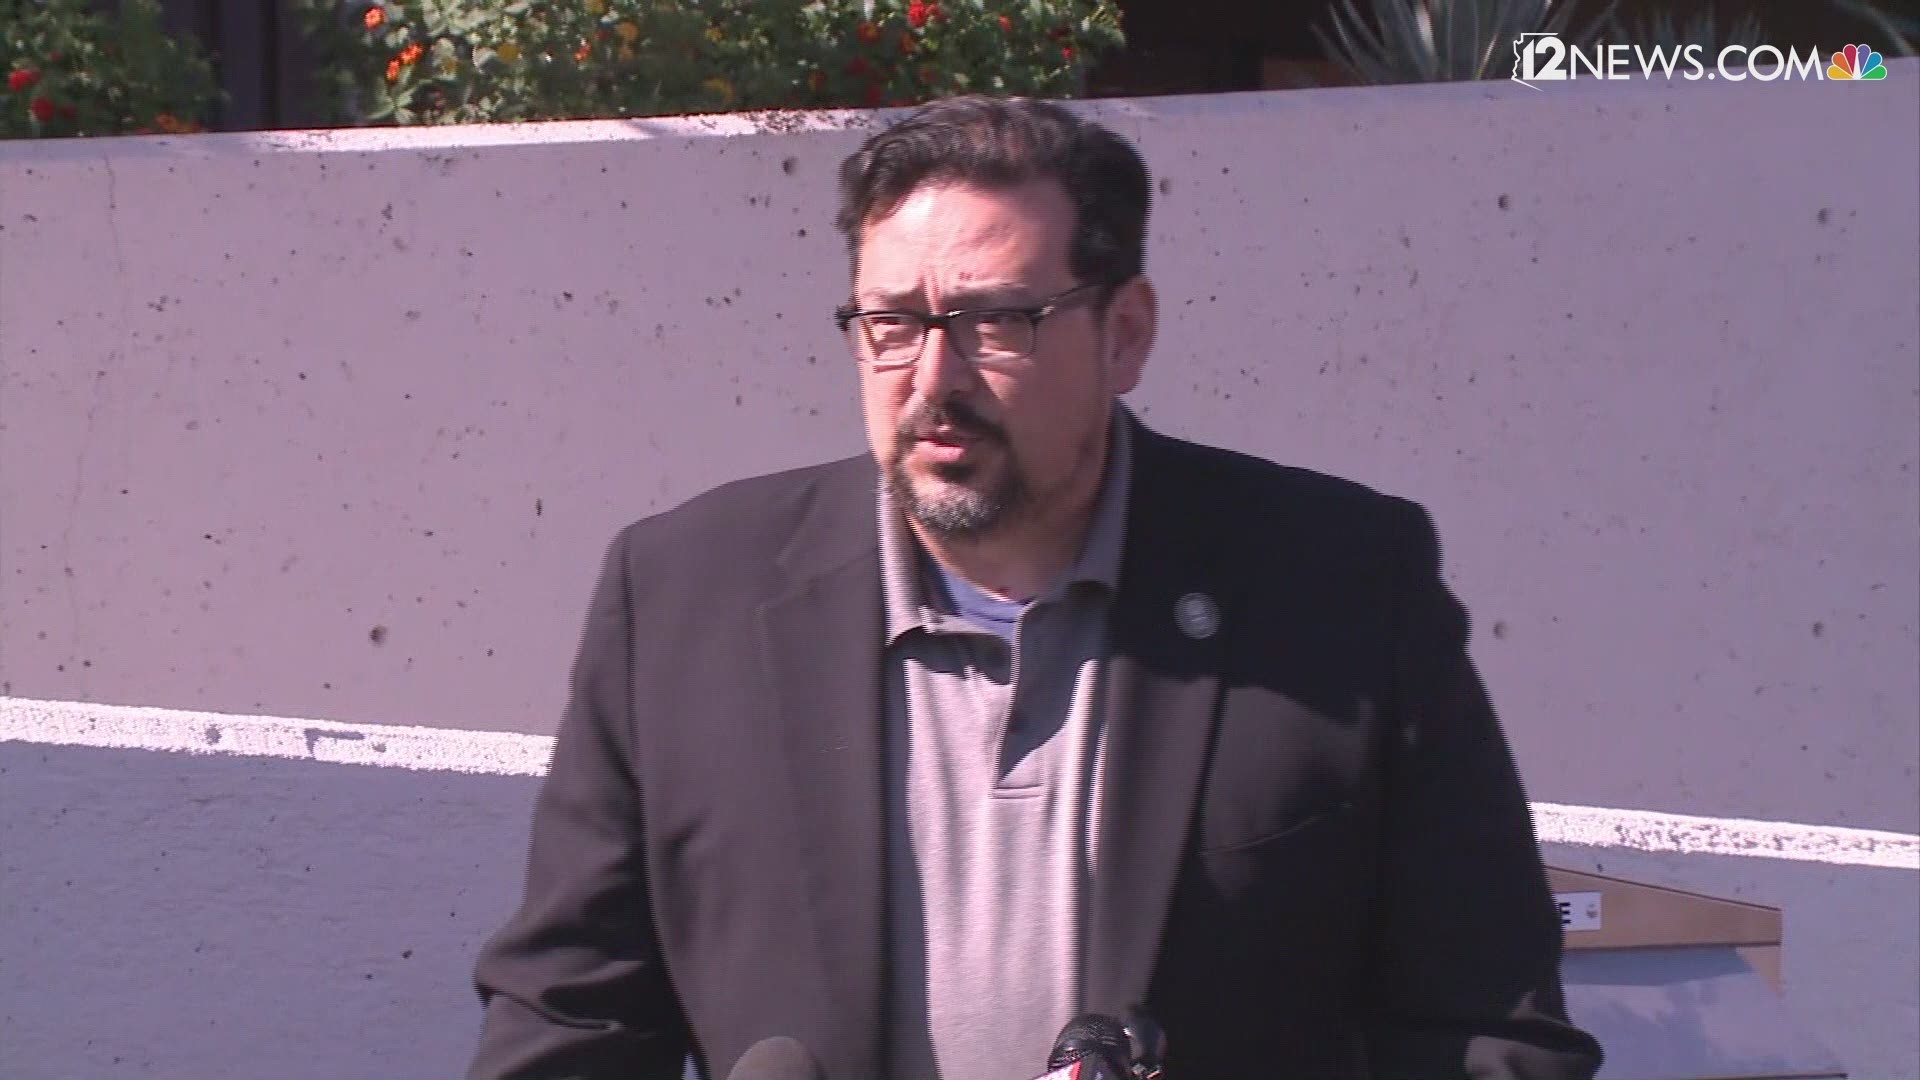 Maricopa County Recorder Adrian Fontes held a media briefing on 11/8/18 to give election updates on lawsuit affecting ballots being counted.